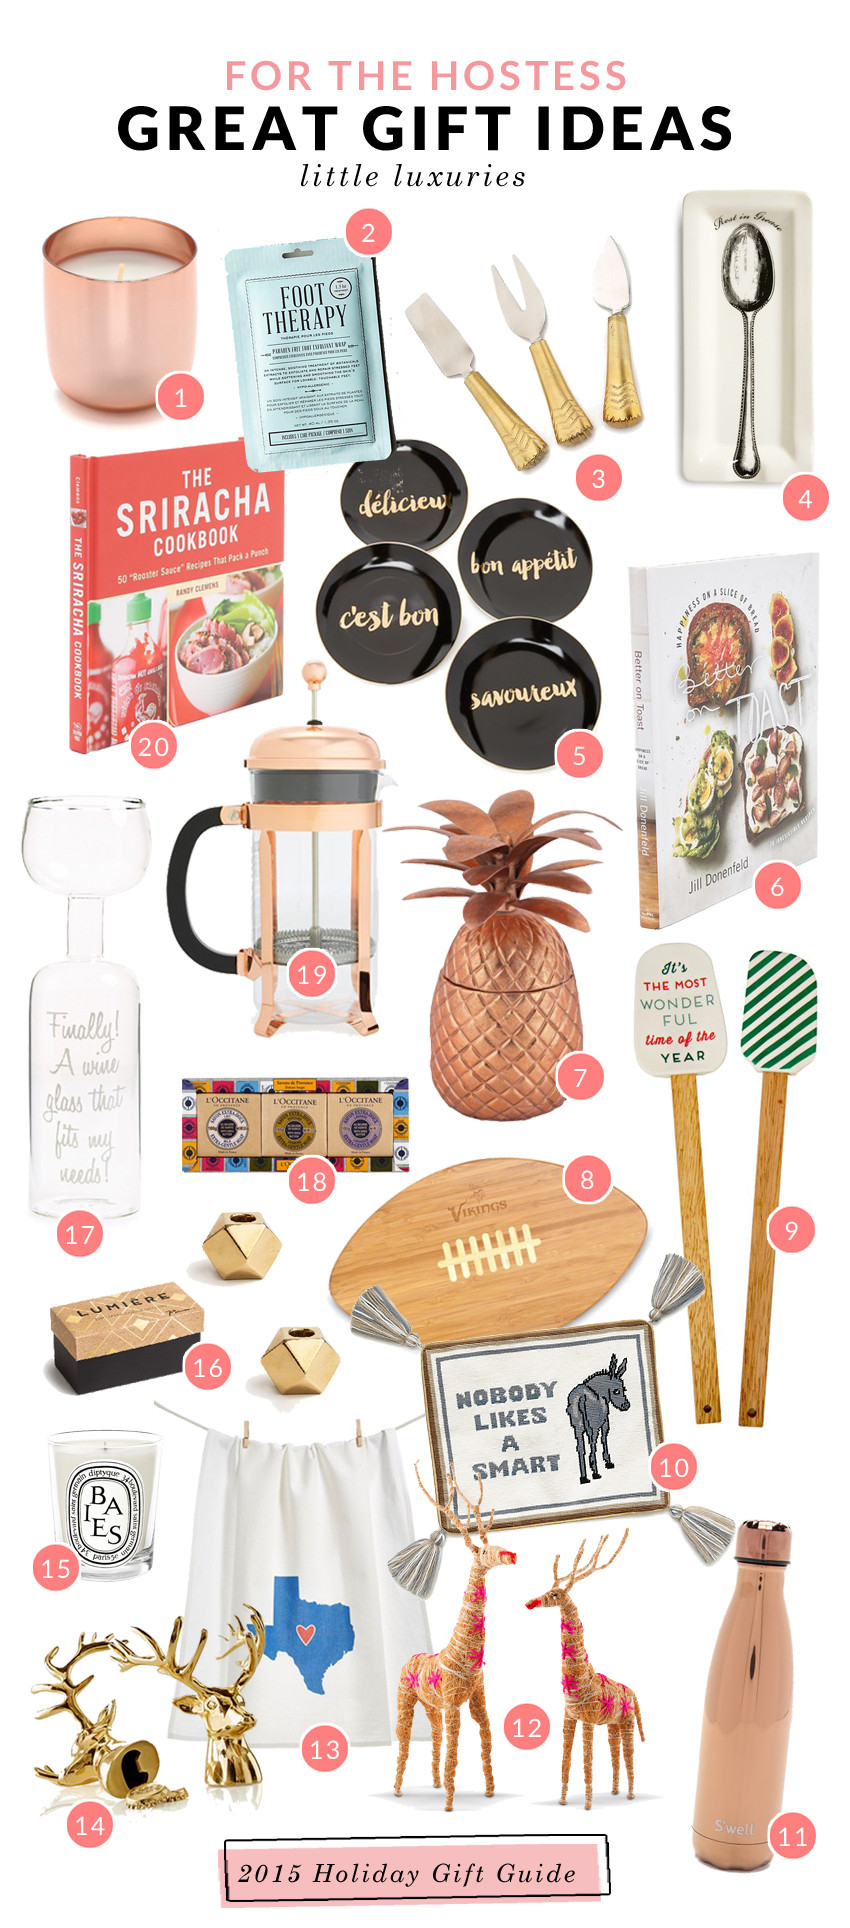 Holiday Hostess Gift Ideas
 Holiday Gift Guide Ideas for the Host & Hostess corals